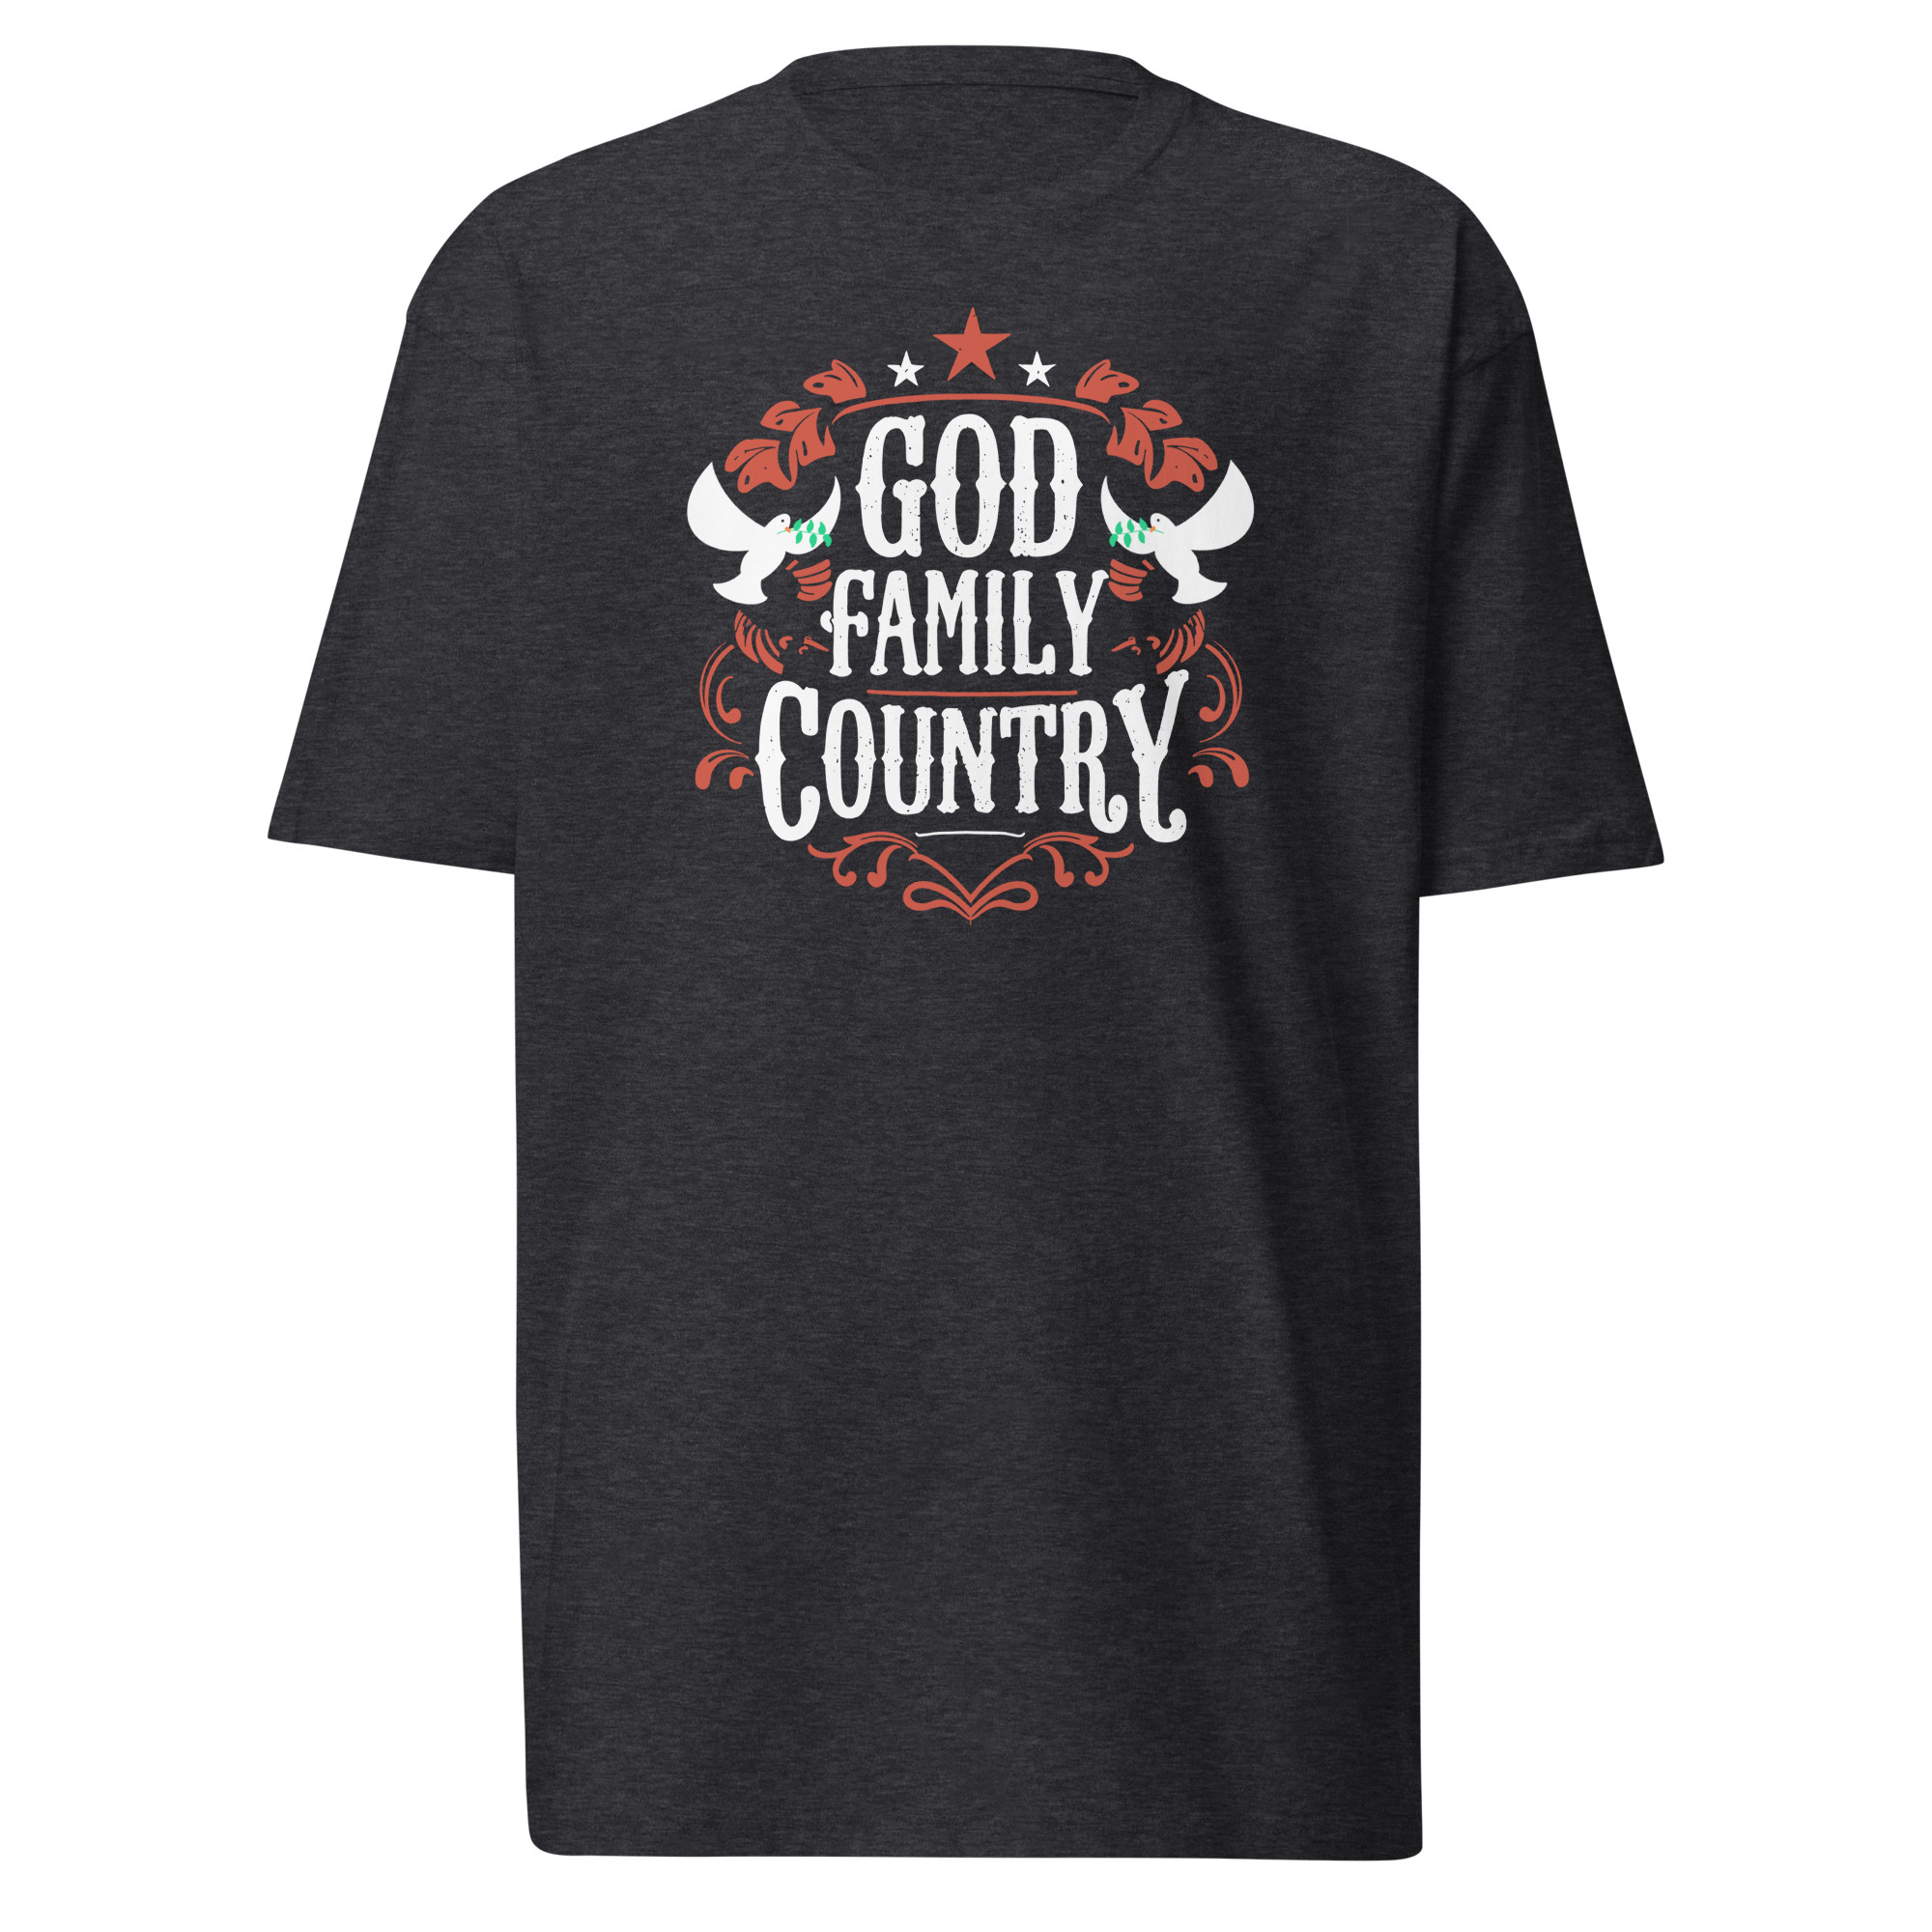 God, Family, Country T-Shirt - Charcoal Heather / L